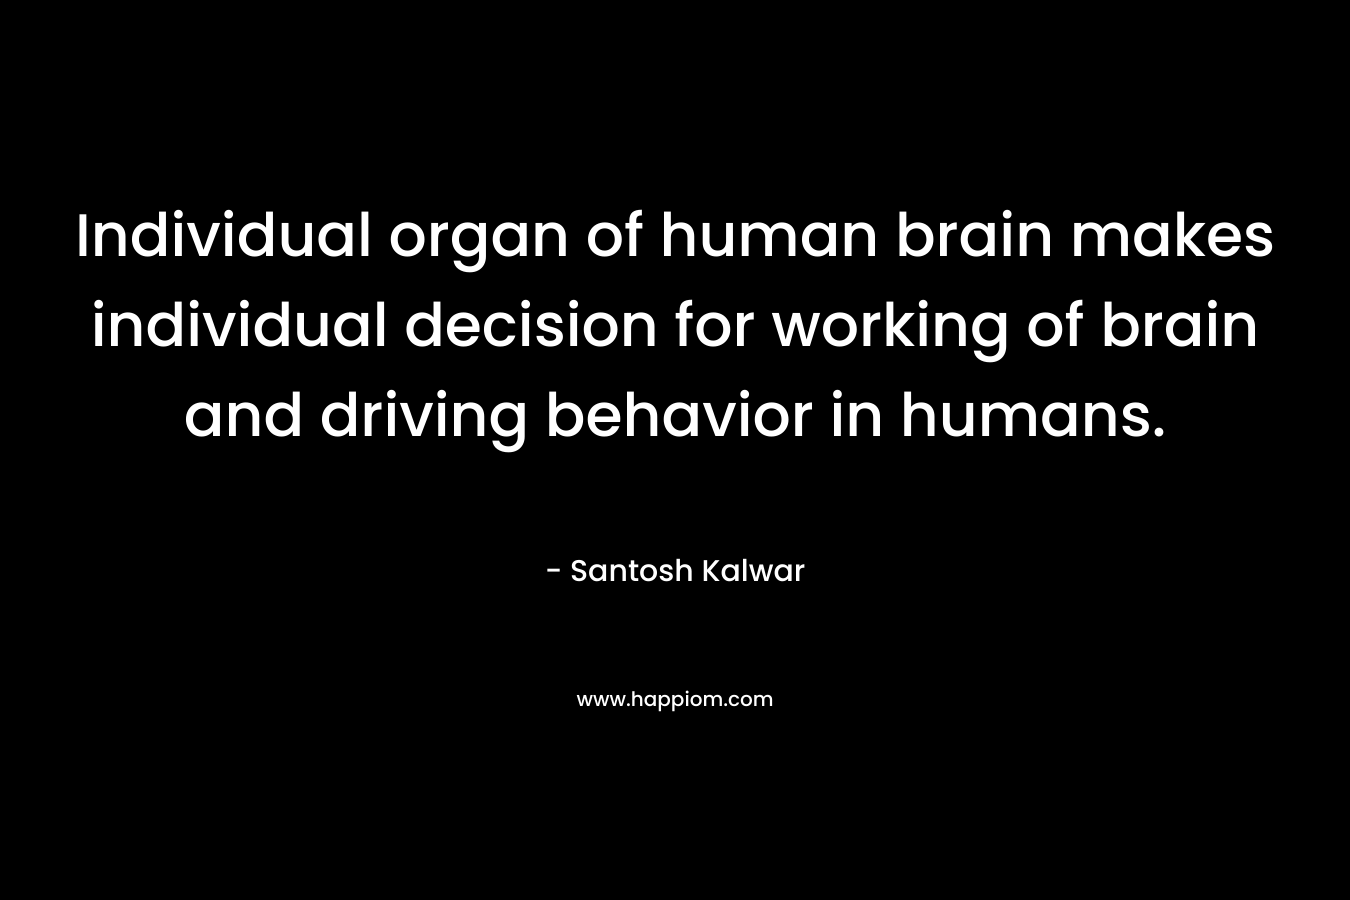 Individual organ of human brain makes individual decision for working of brain and driving behavior in humans.